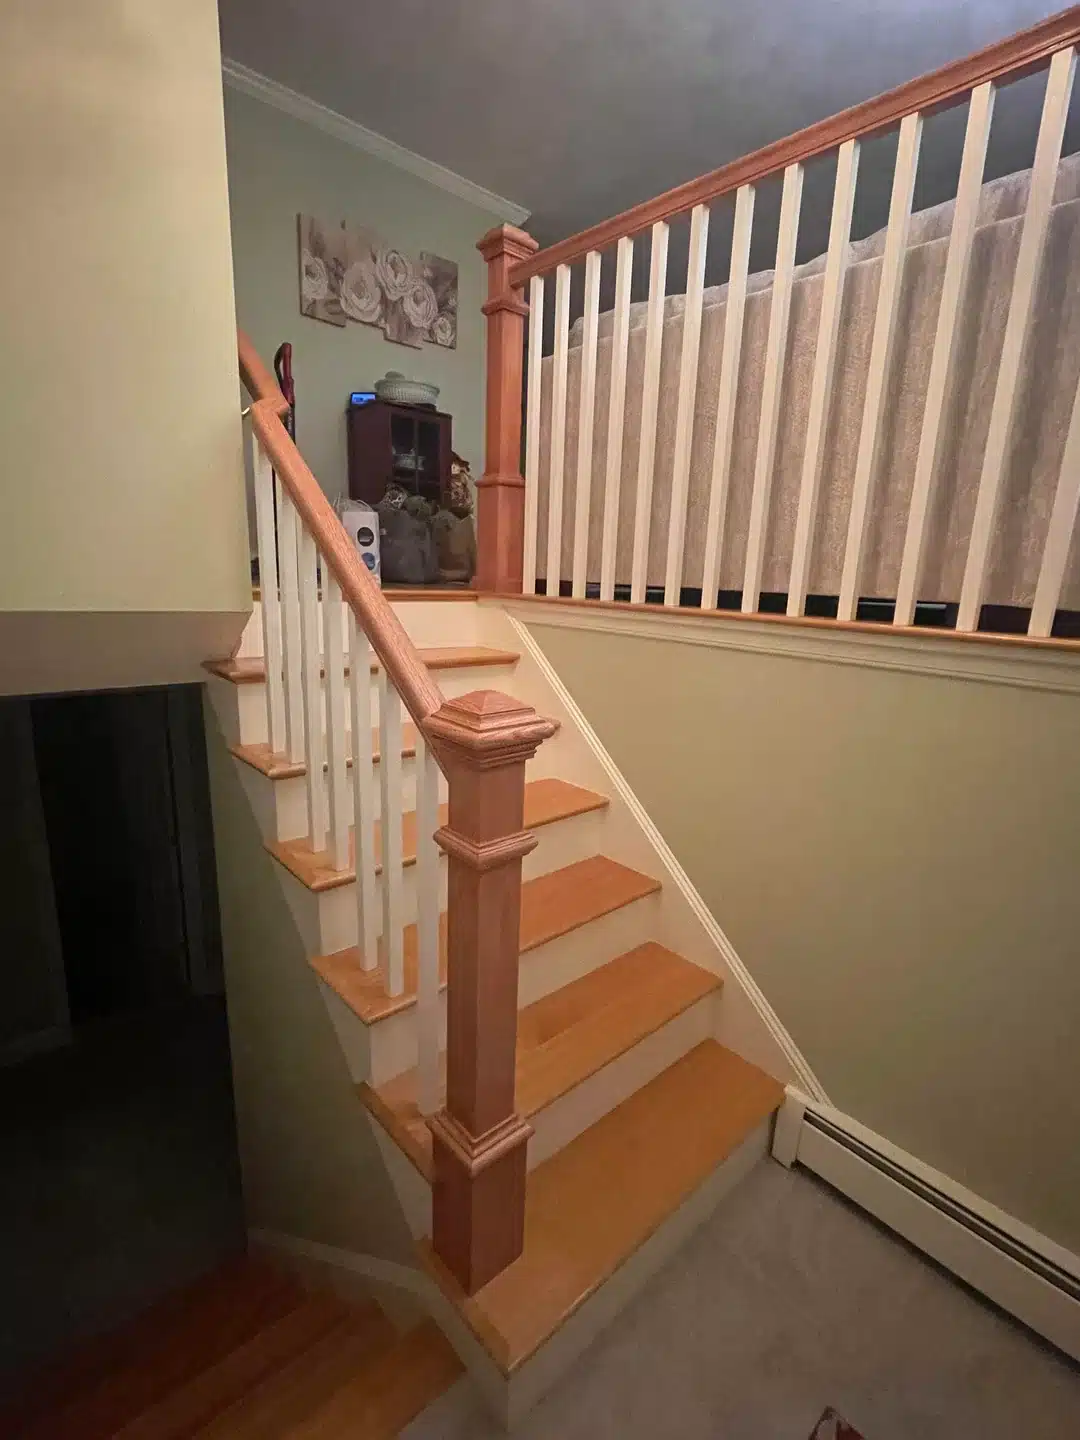 Your comprehensive guide to stair railings: everything you need to know